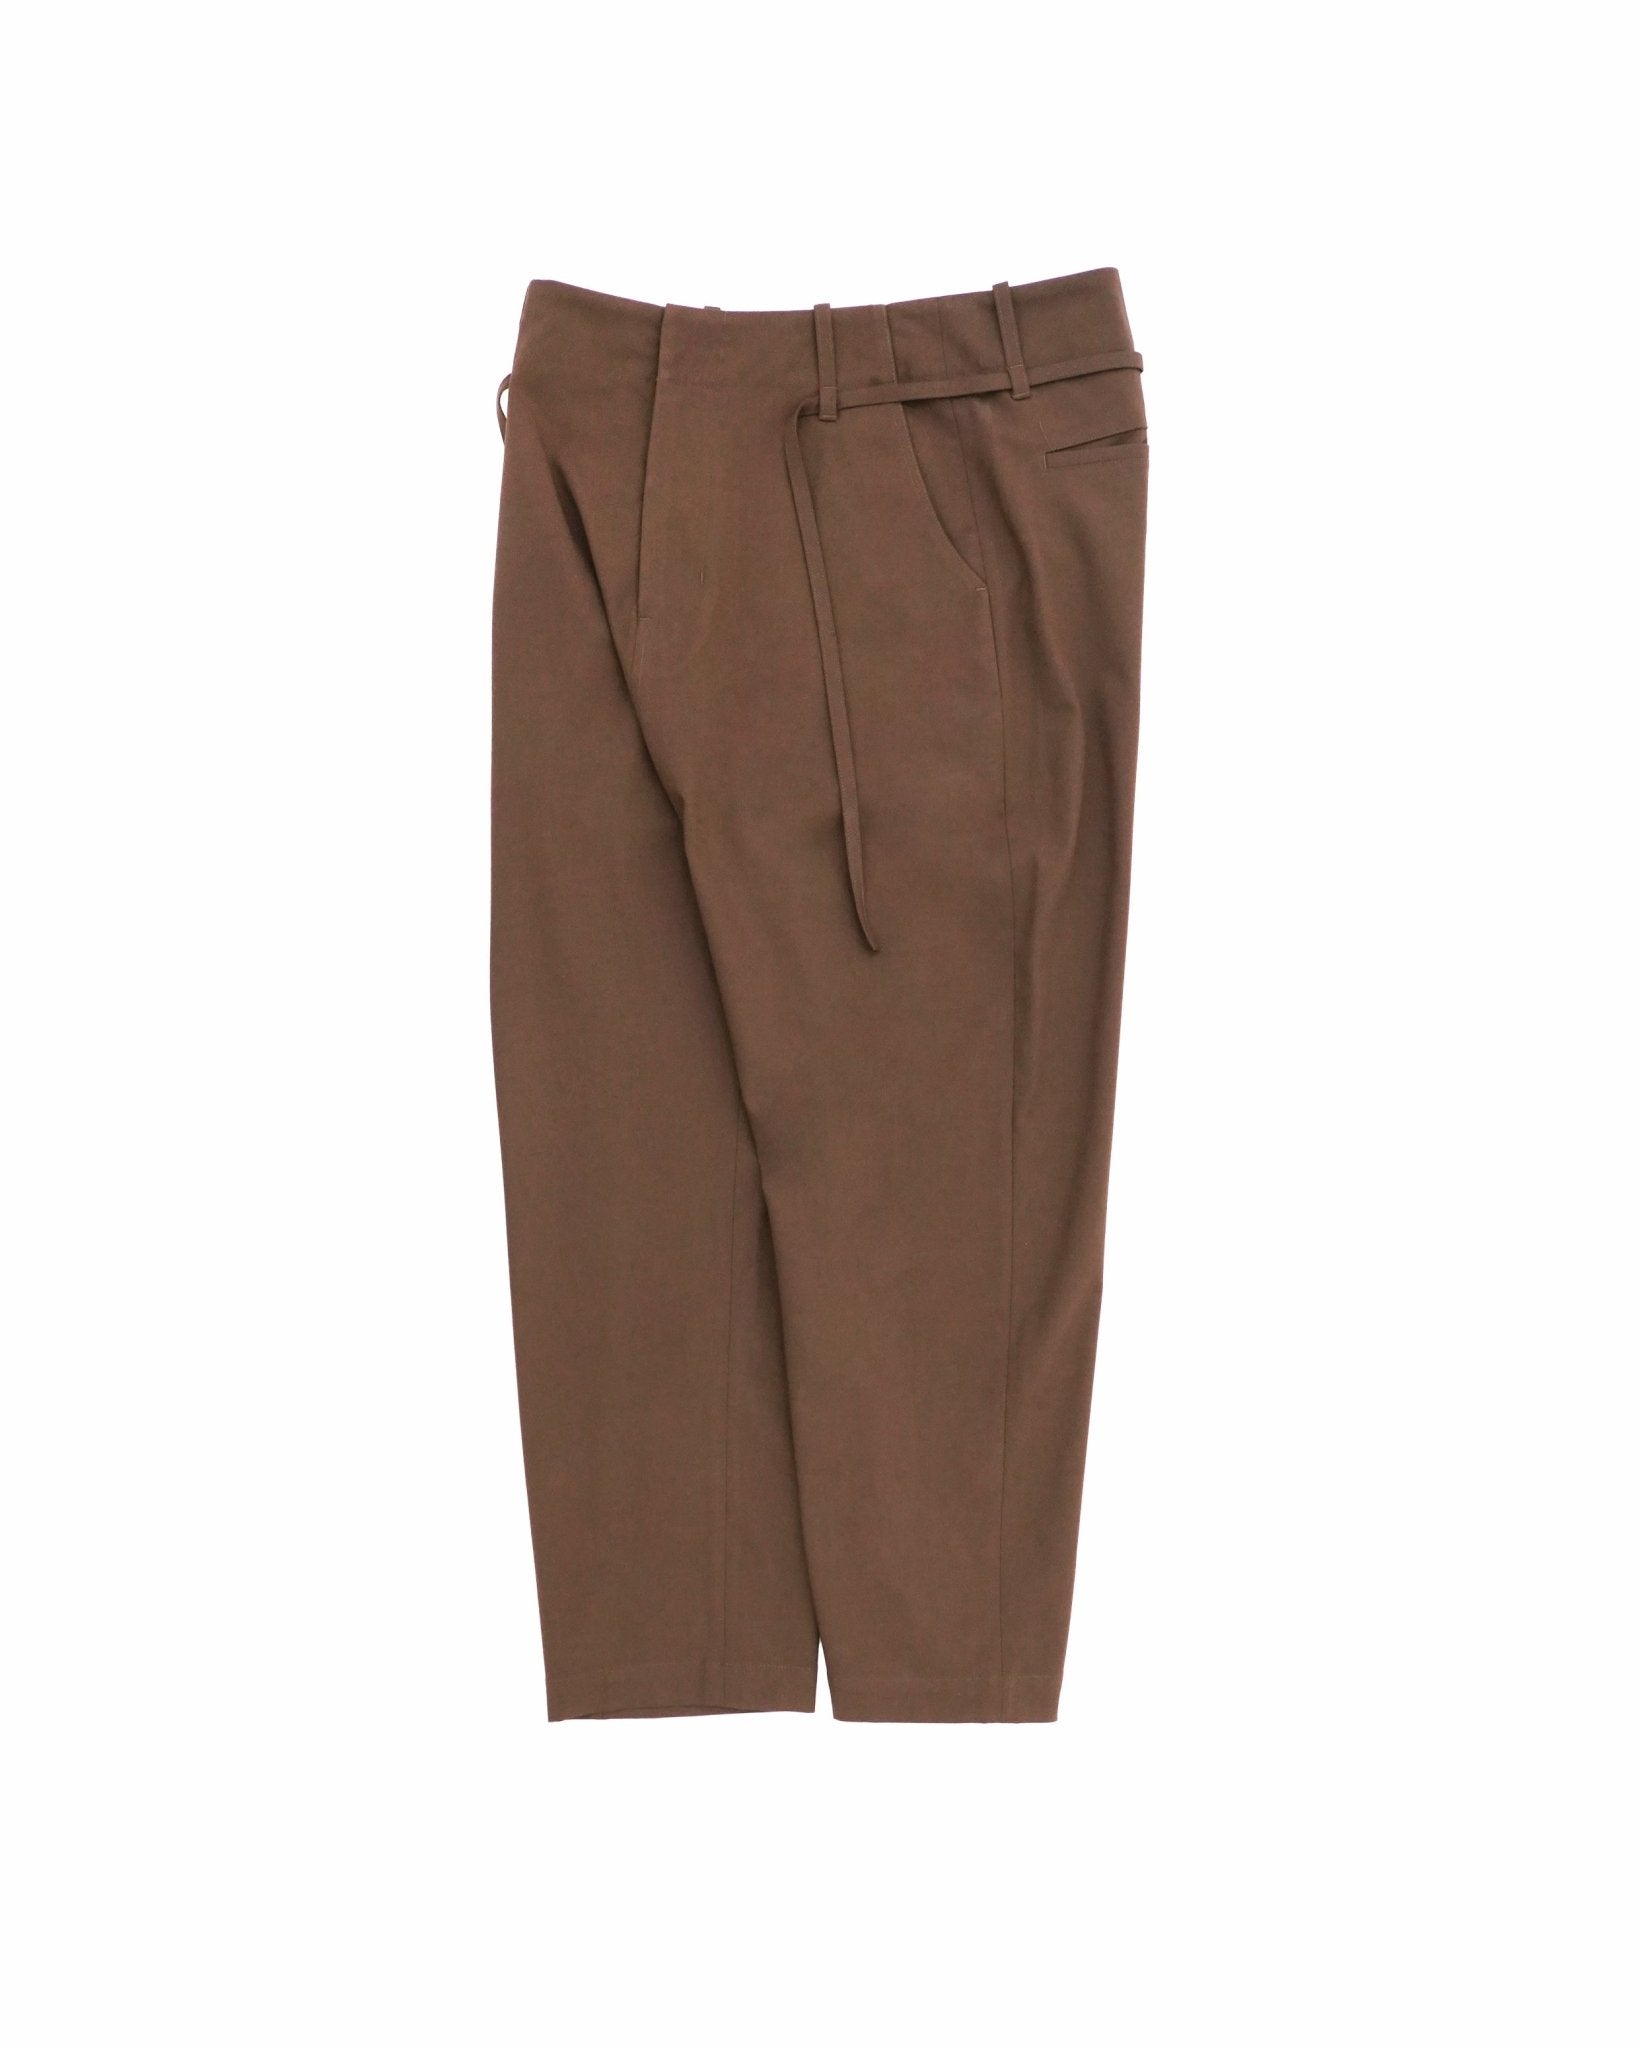 Tailored Dropped Crotch Pants - Copper Brown - G R A Y E